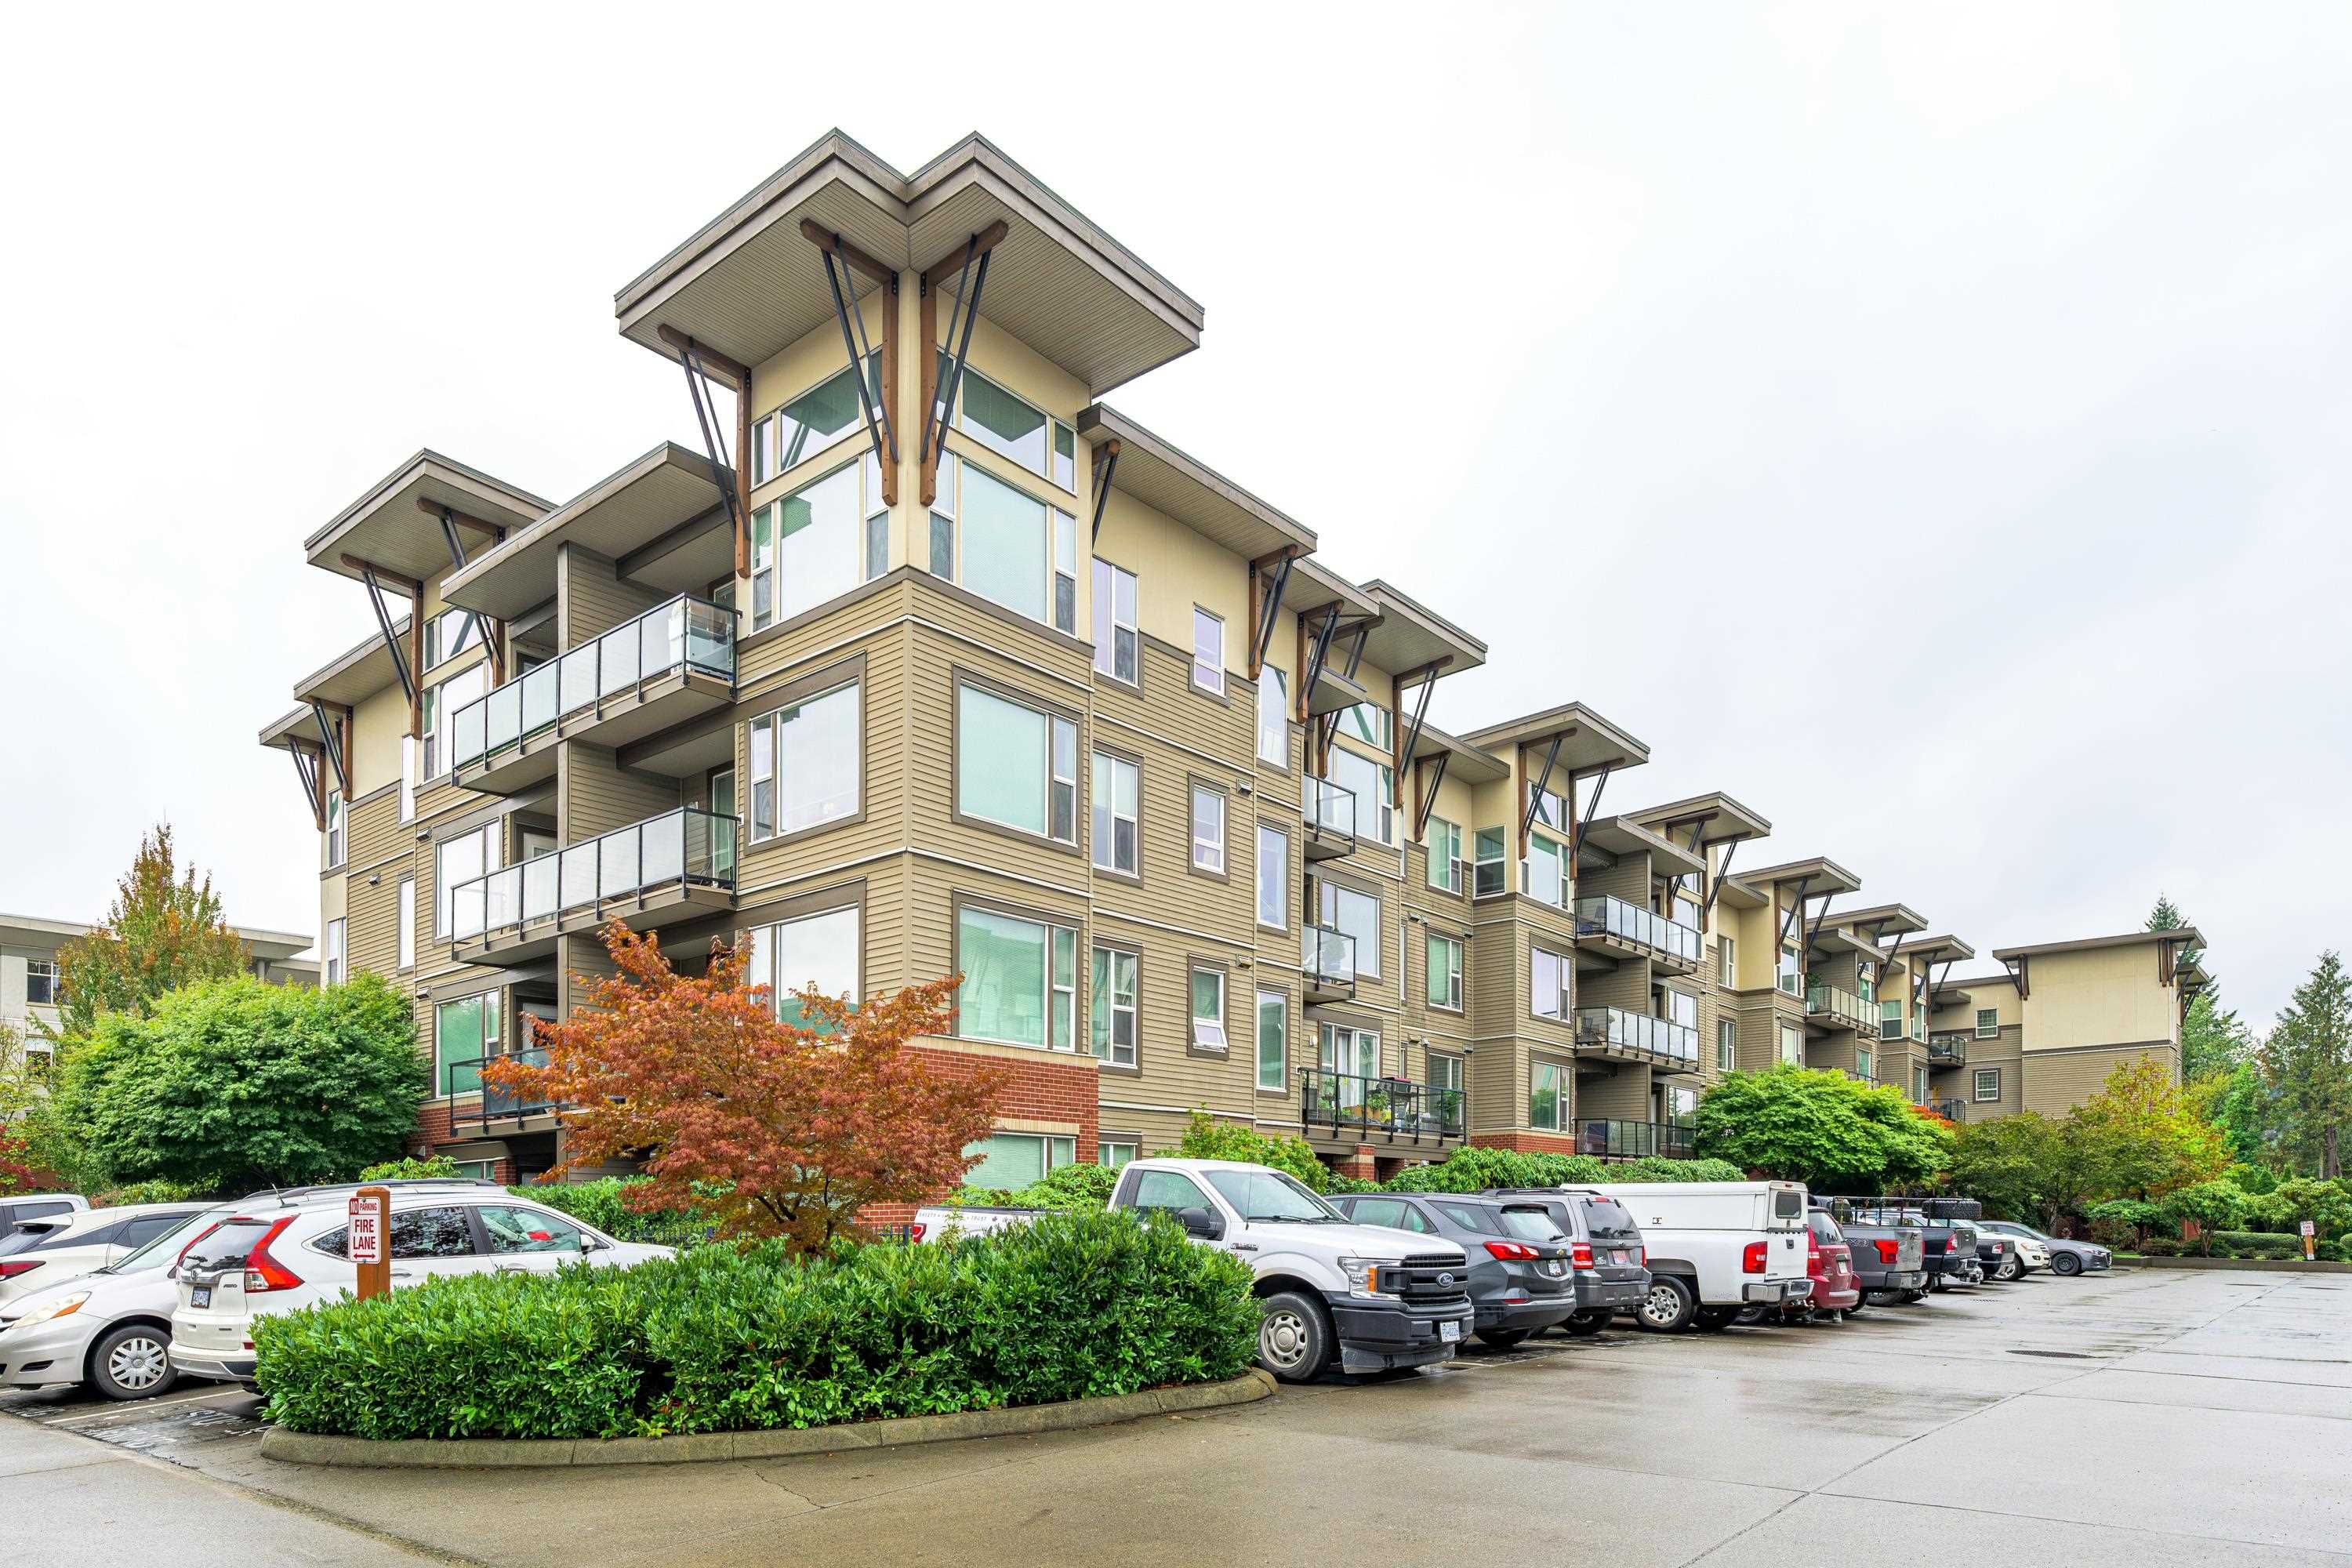 -One of the best perks of living at The Crossing is the high walkability score to cafes, shopping, dinning, parks, and so much more. You won't need a gym membership as this complex comes with an exercise room. This unit is close to schools and transit.